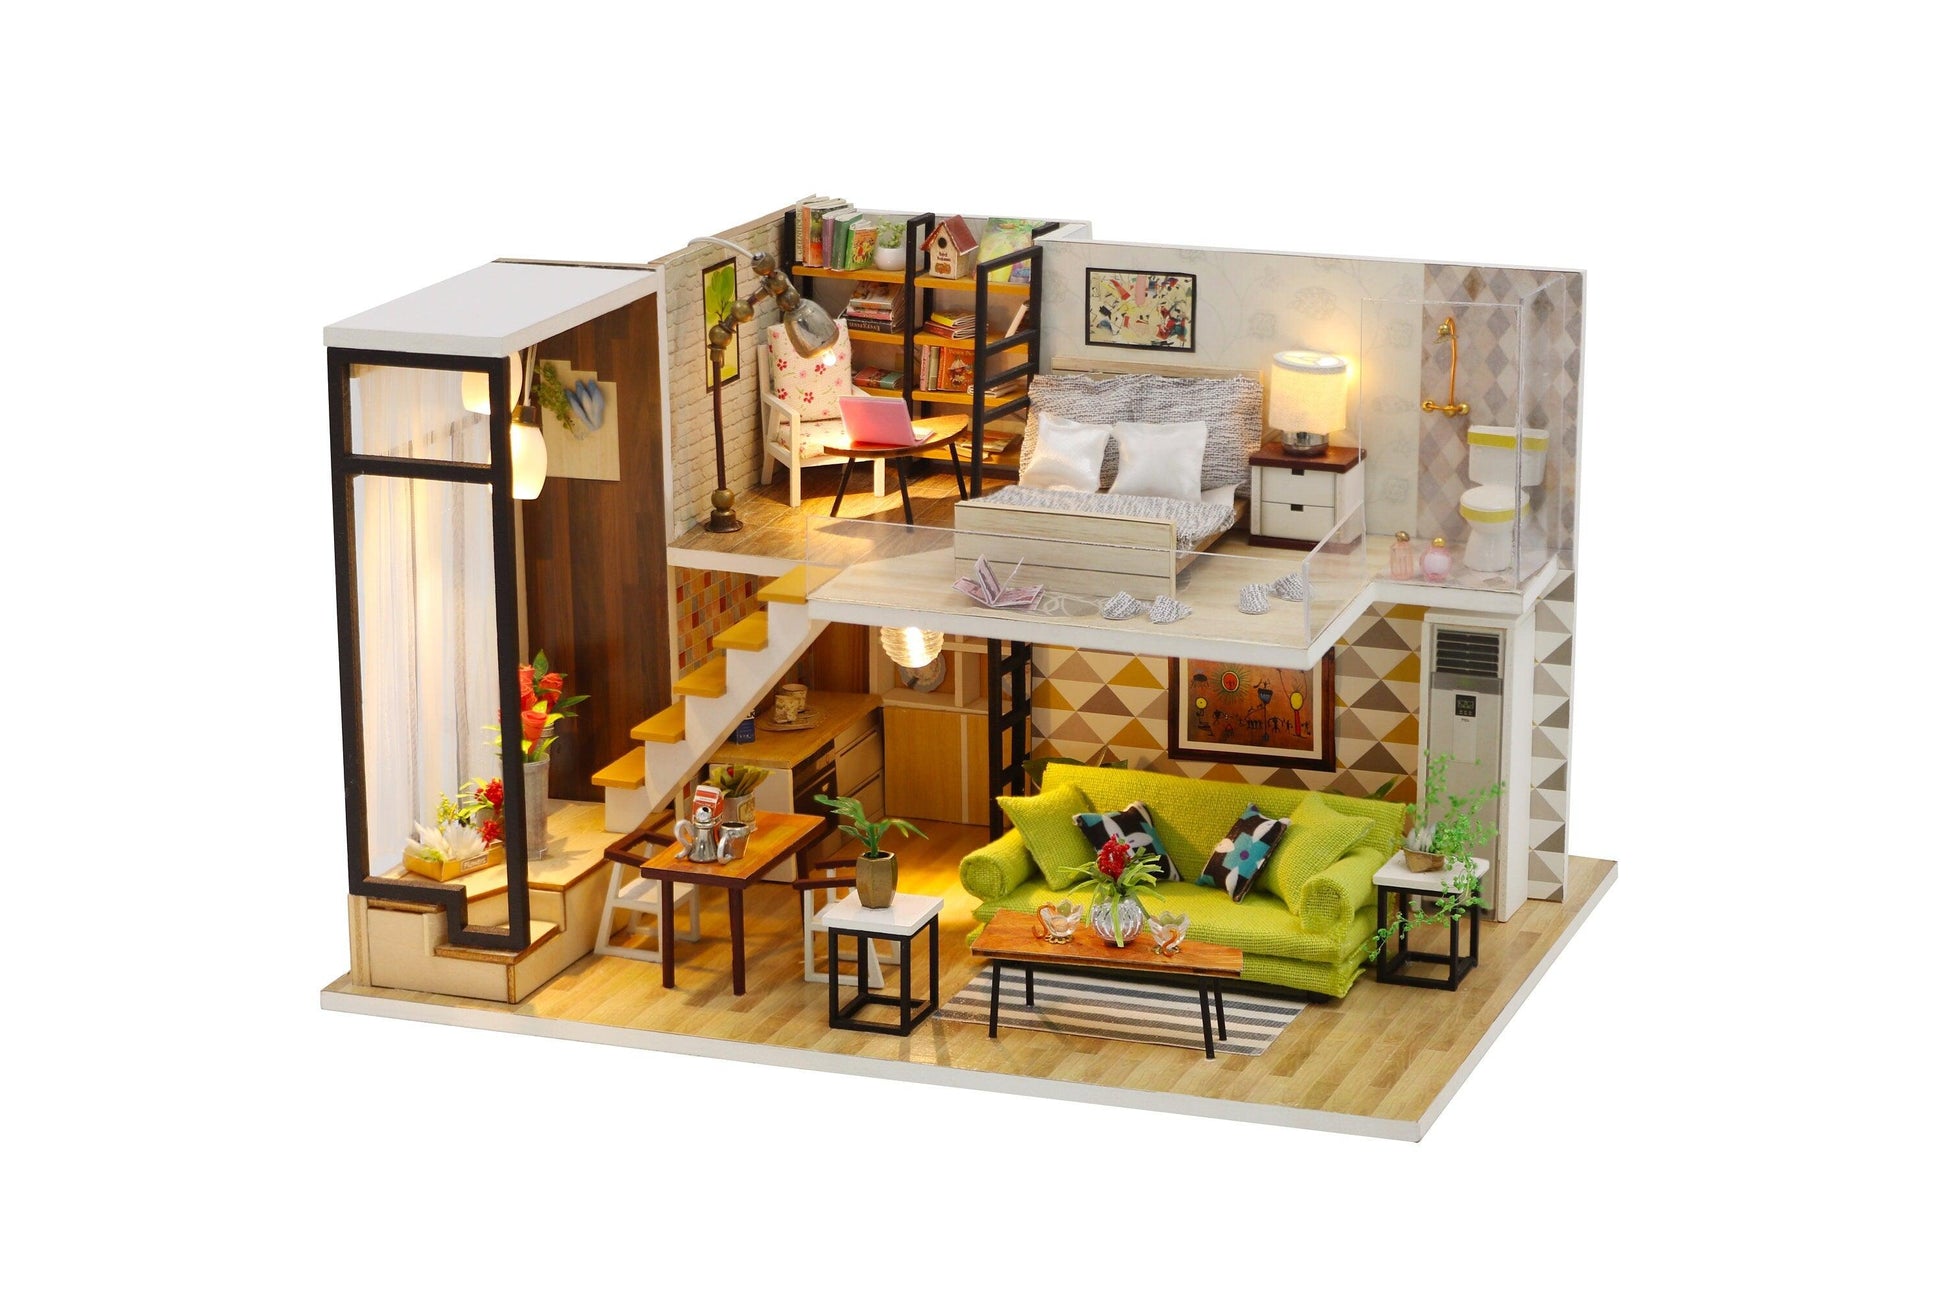 Doll House Miniature Dollhouse With Furniture Kit Wooden House Miniatures Toys For Children New Year Christmas Gift DIY Dollhouse Kit Adult - Rajbharti Crafts